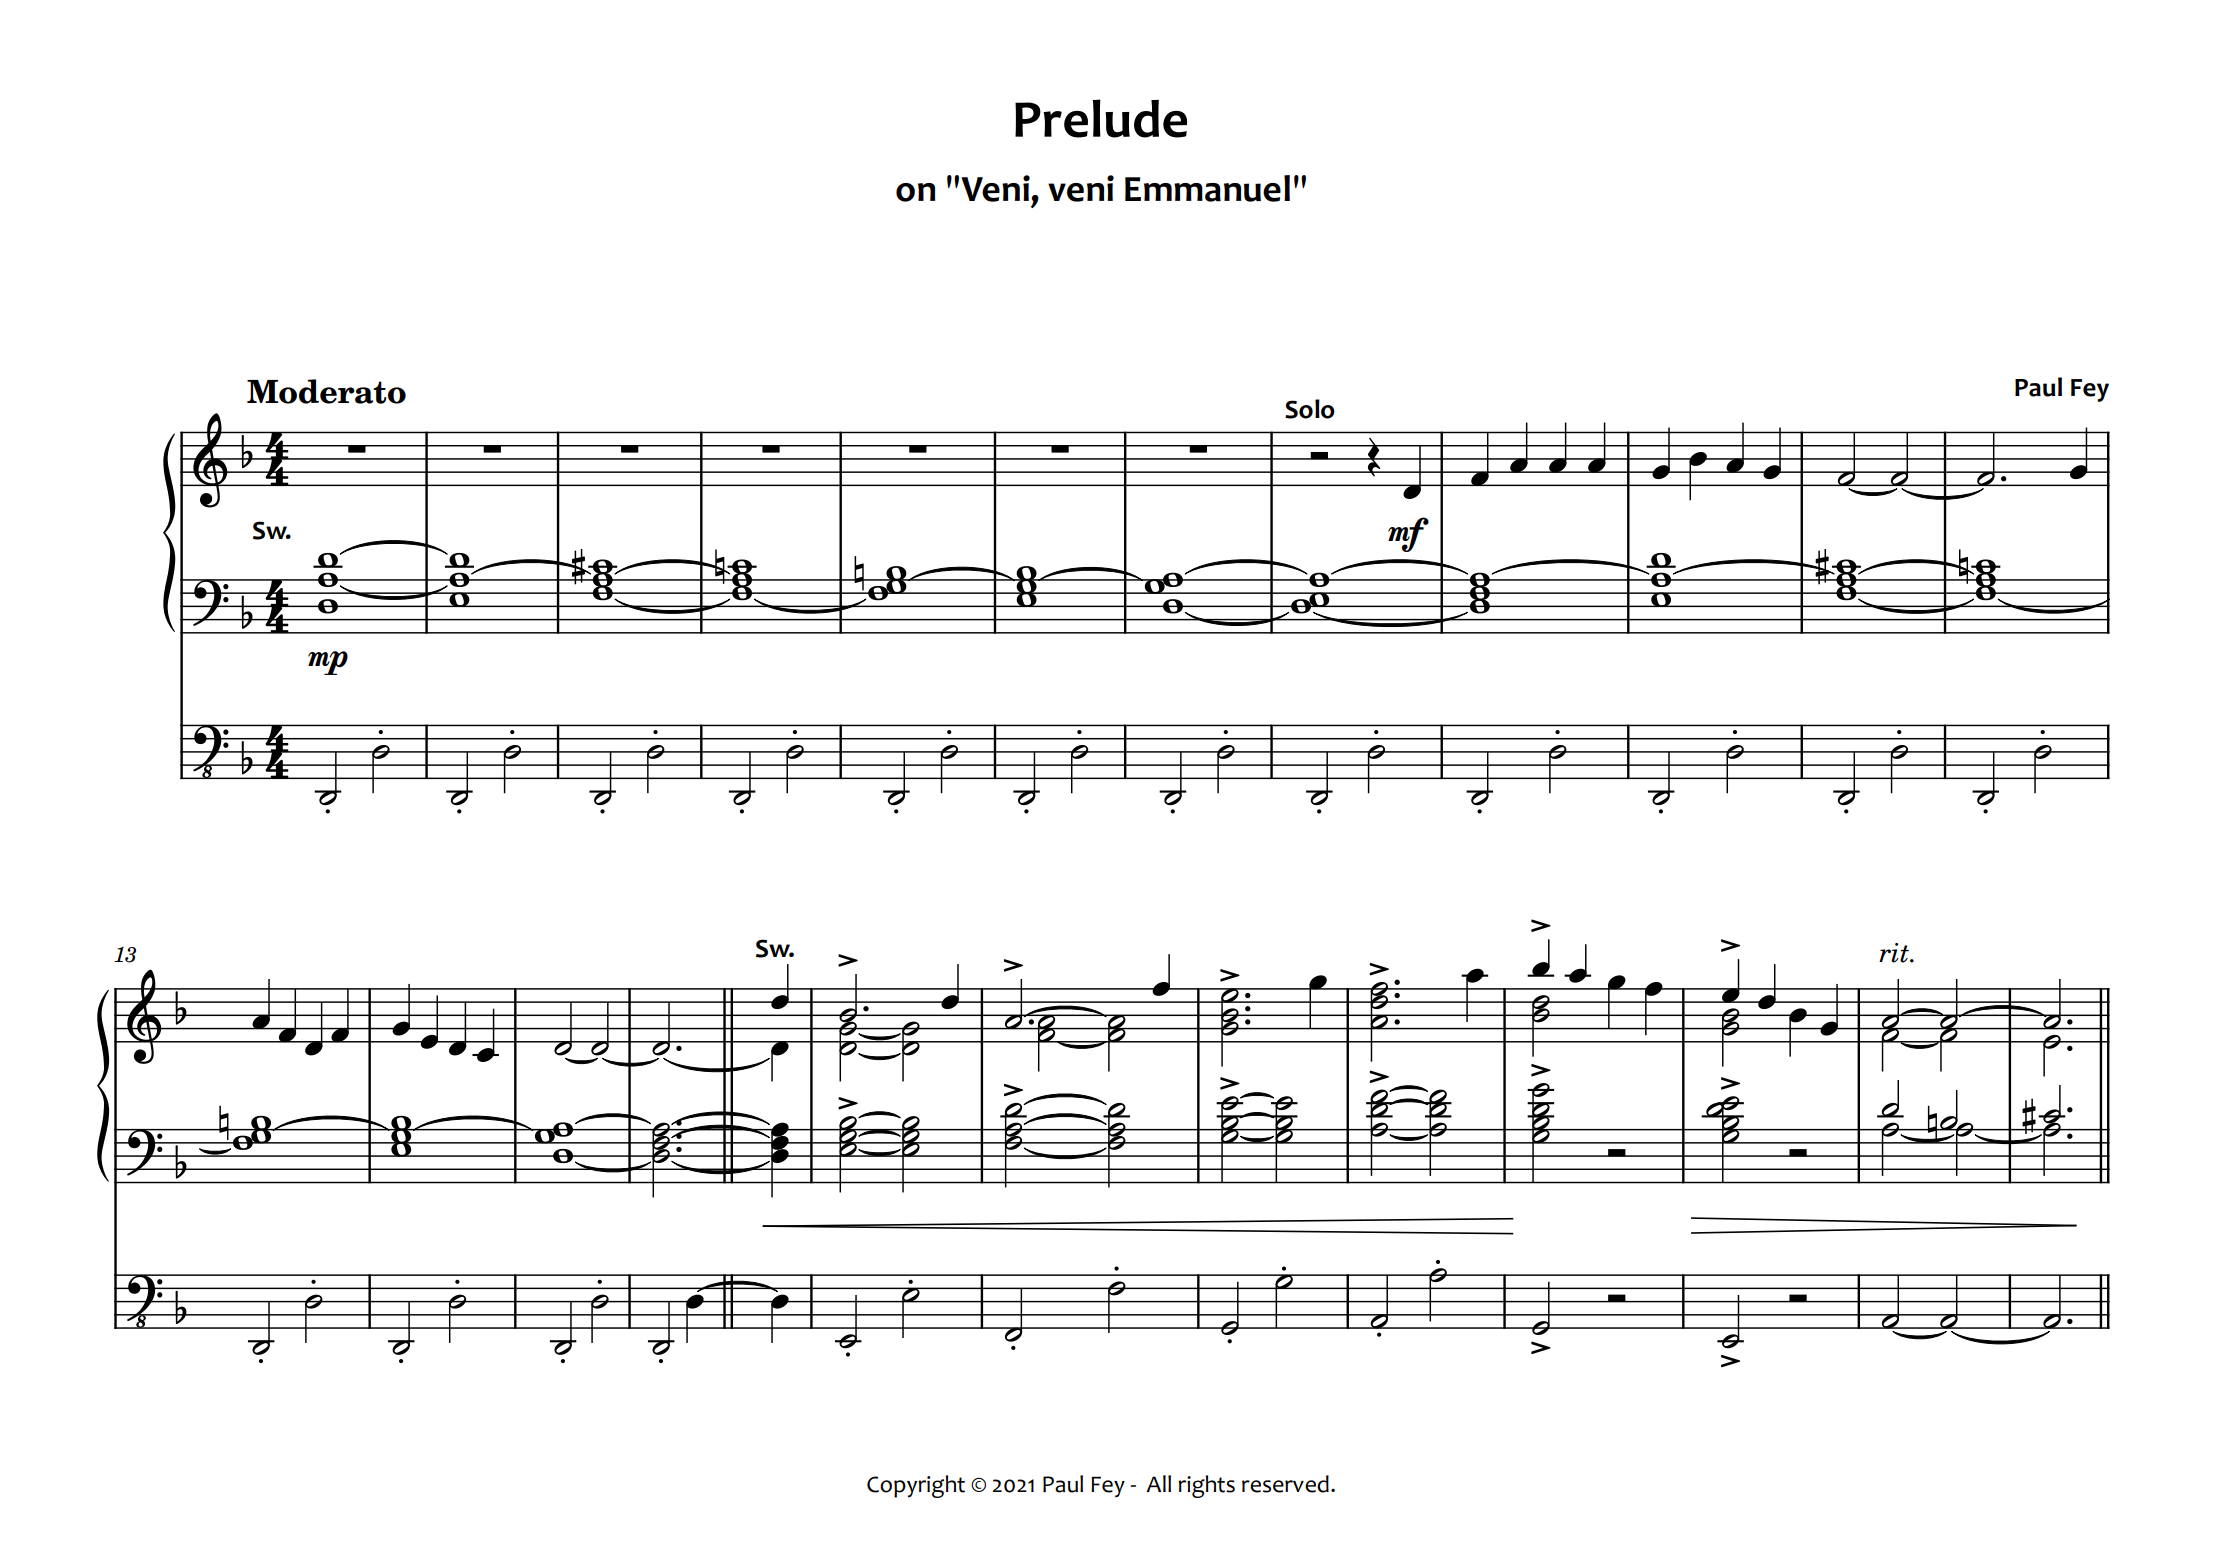 Prelude and Harmonizations on "Veni Emmanuel" (Sheet Music) - Music for Pipe Organ by Paul Fey